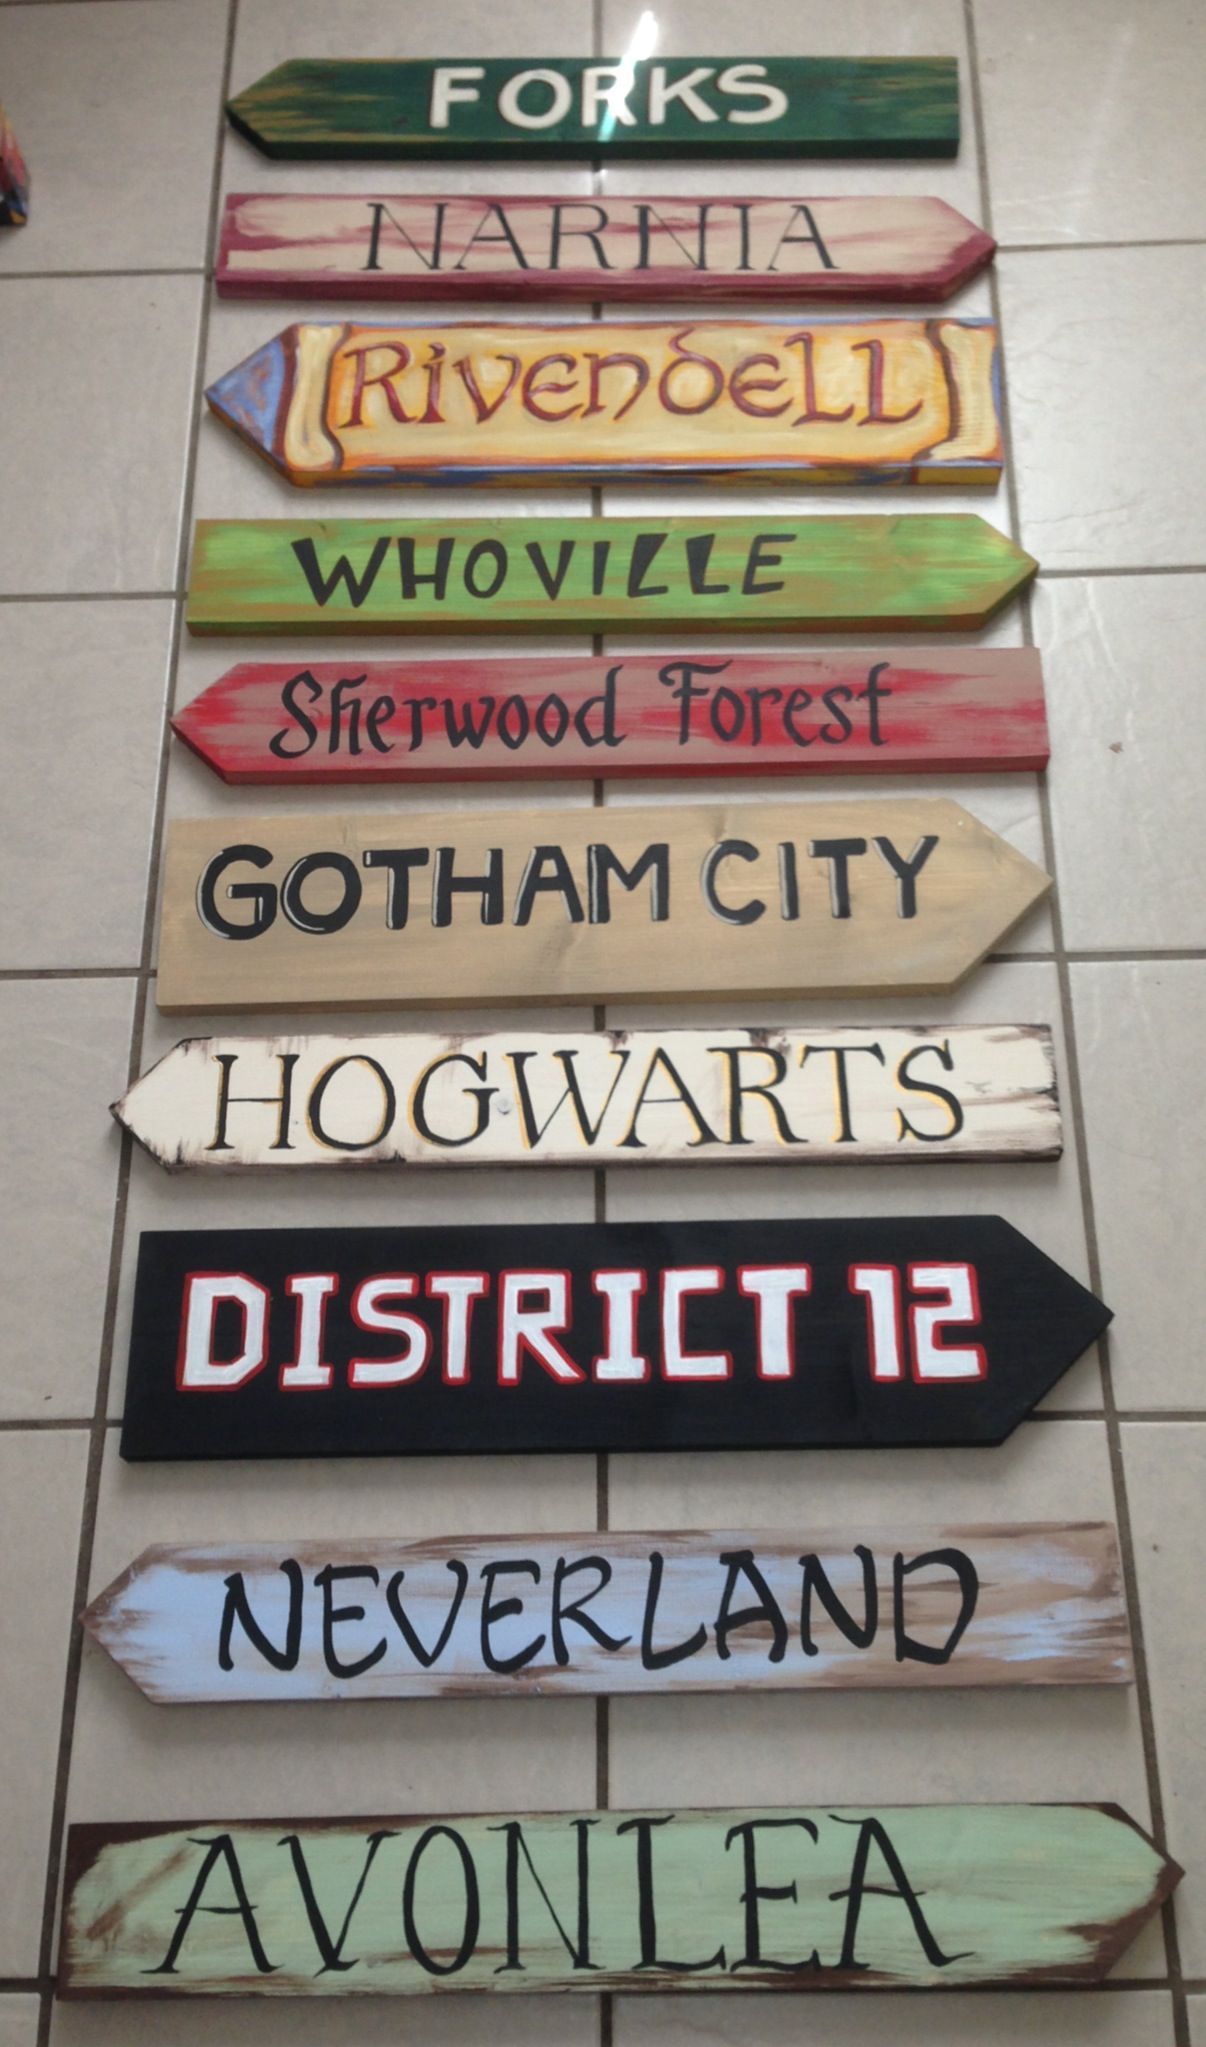 Great garden signs! Hogwarts, Narnia, Rivendell, Neverland... Which one would you be putting up?